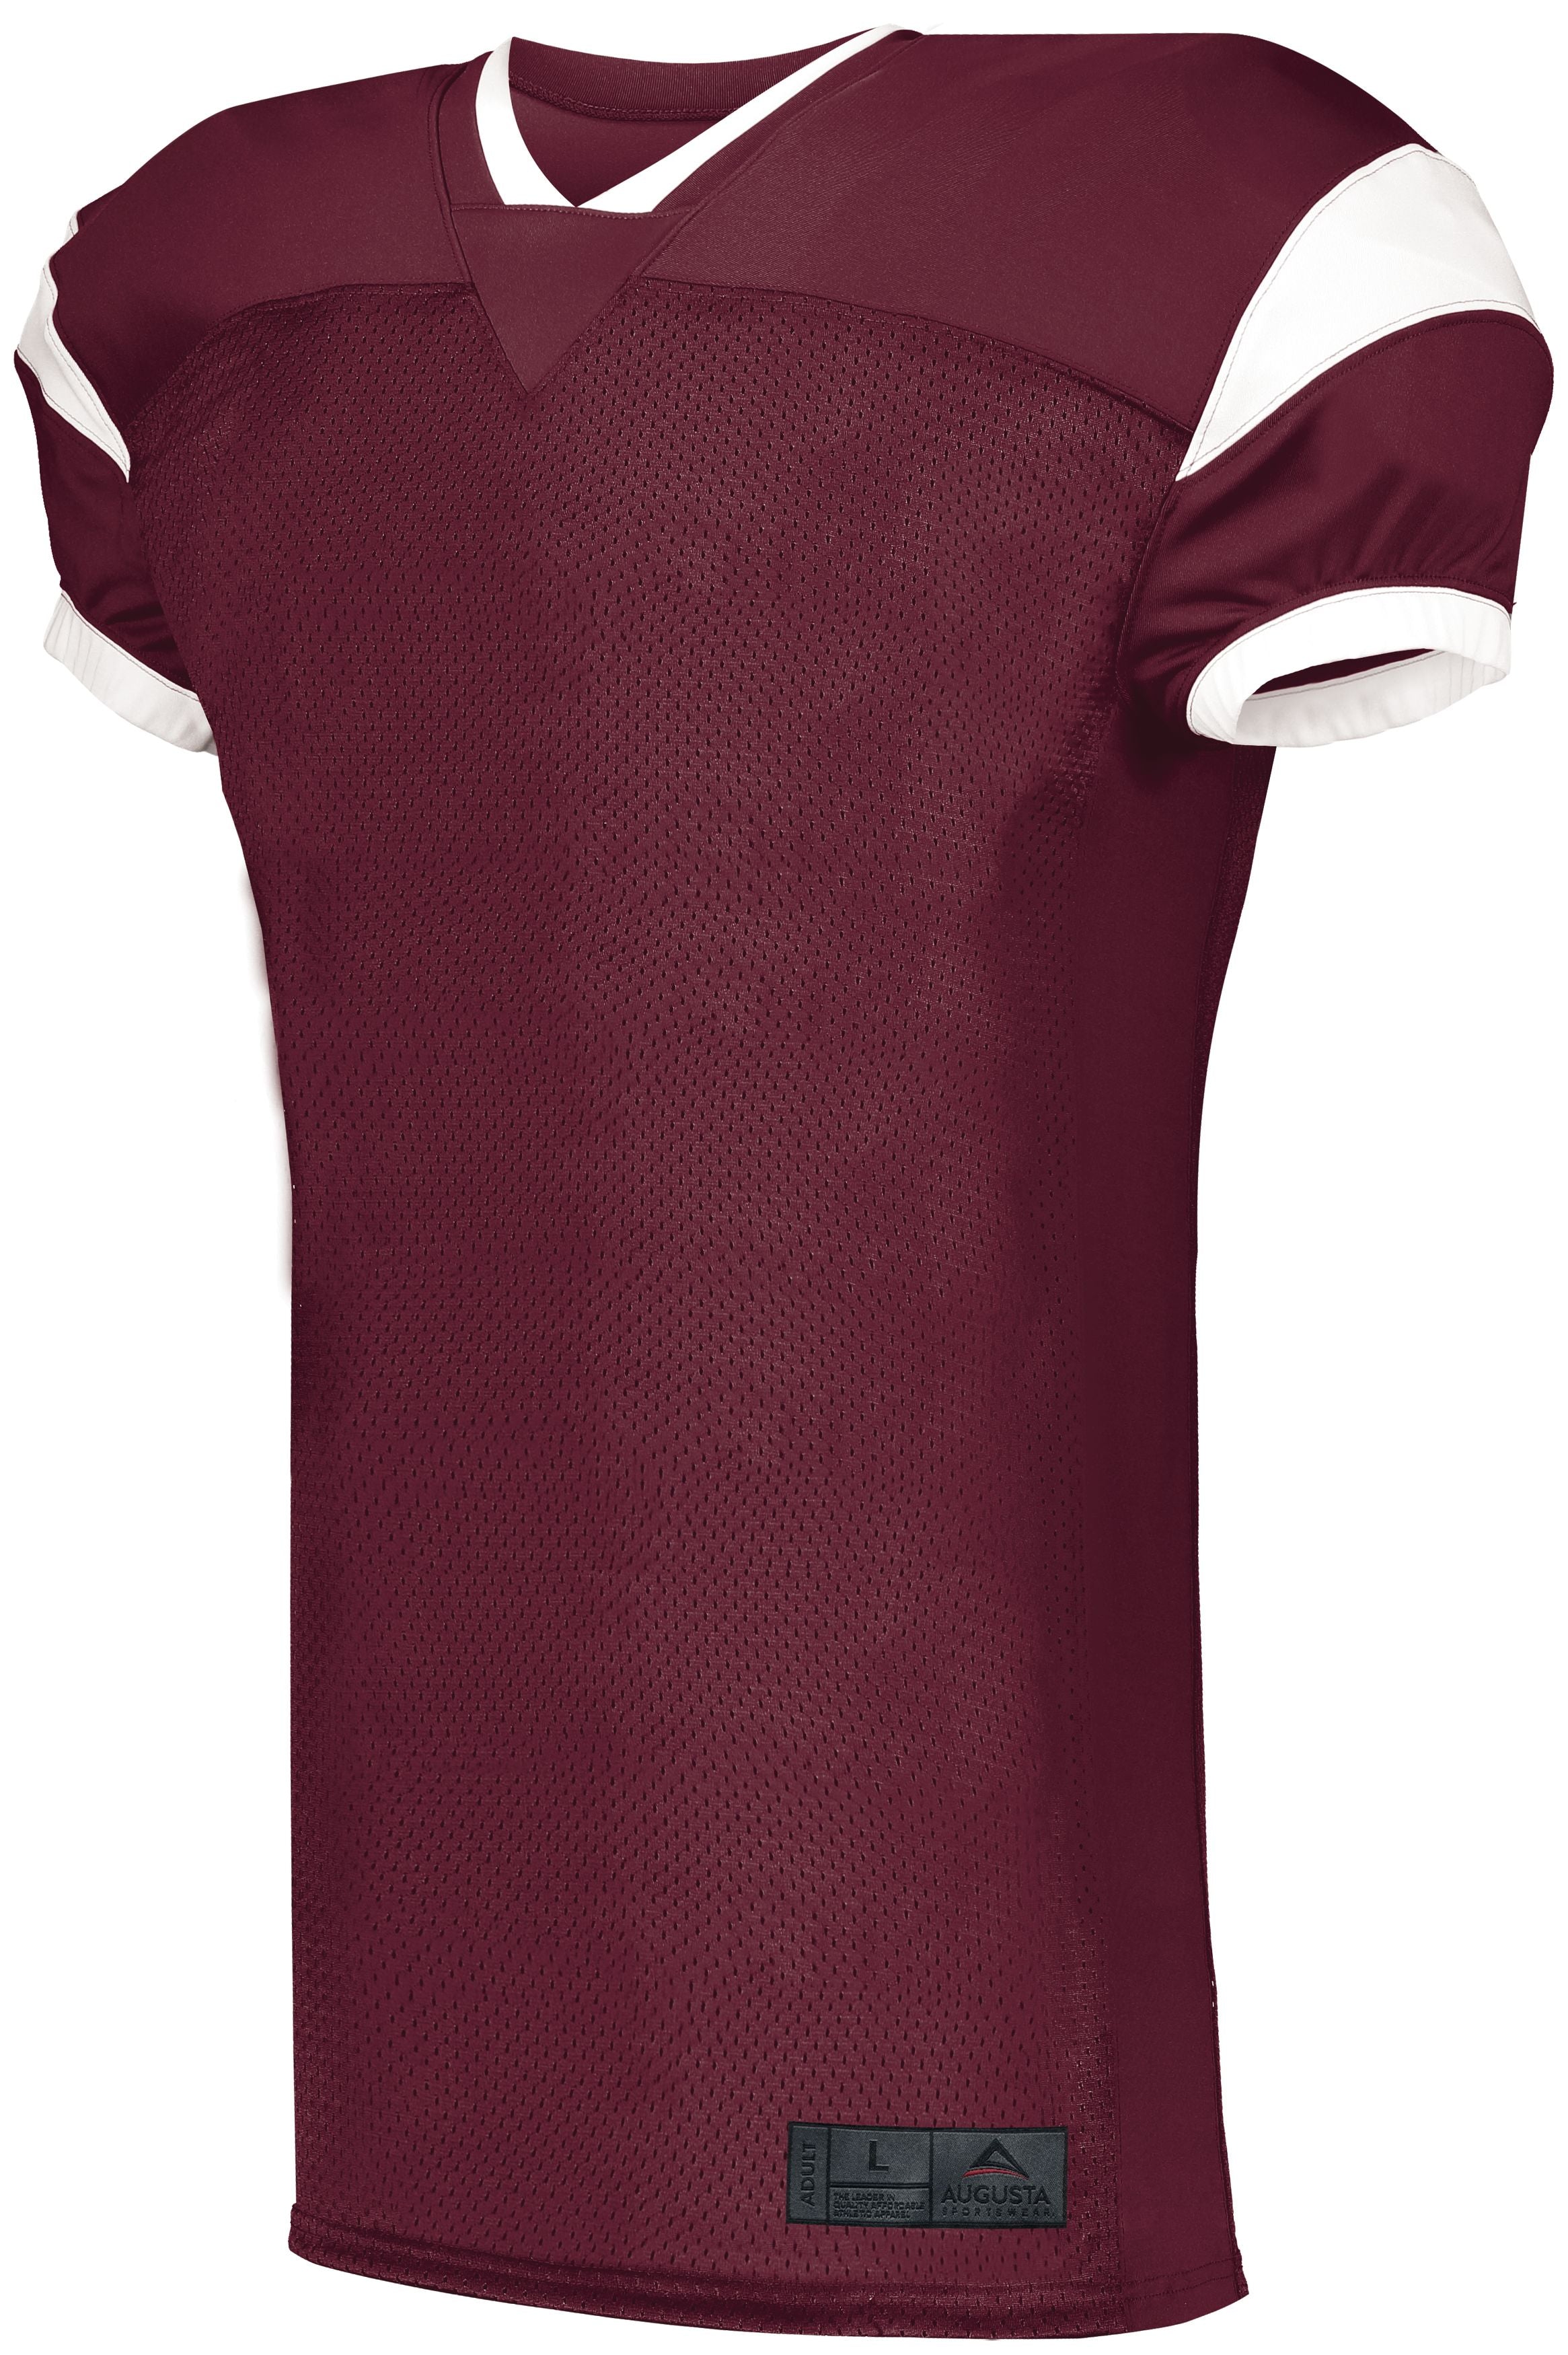 Augusta Sportswear Slant Football Jersey in Maroon/White  -Part of the Adult, Adult-Jersey, Augusta-Products, Football, Shirts, All-Sports, All-Sports-1 product lines at KanaleyCreations.com